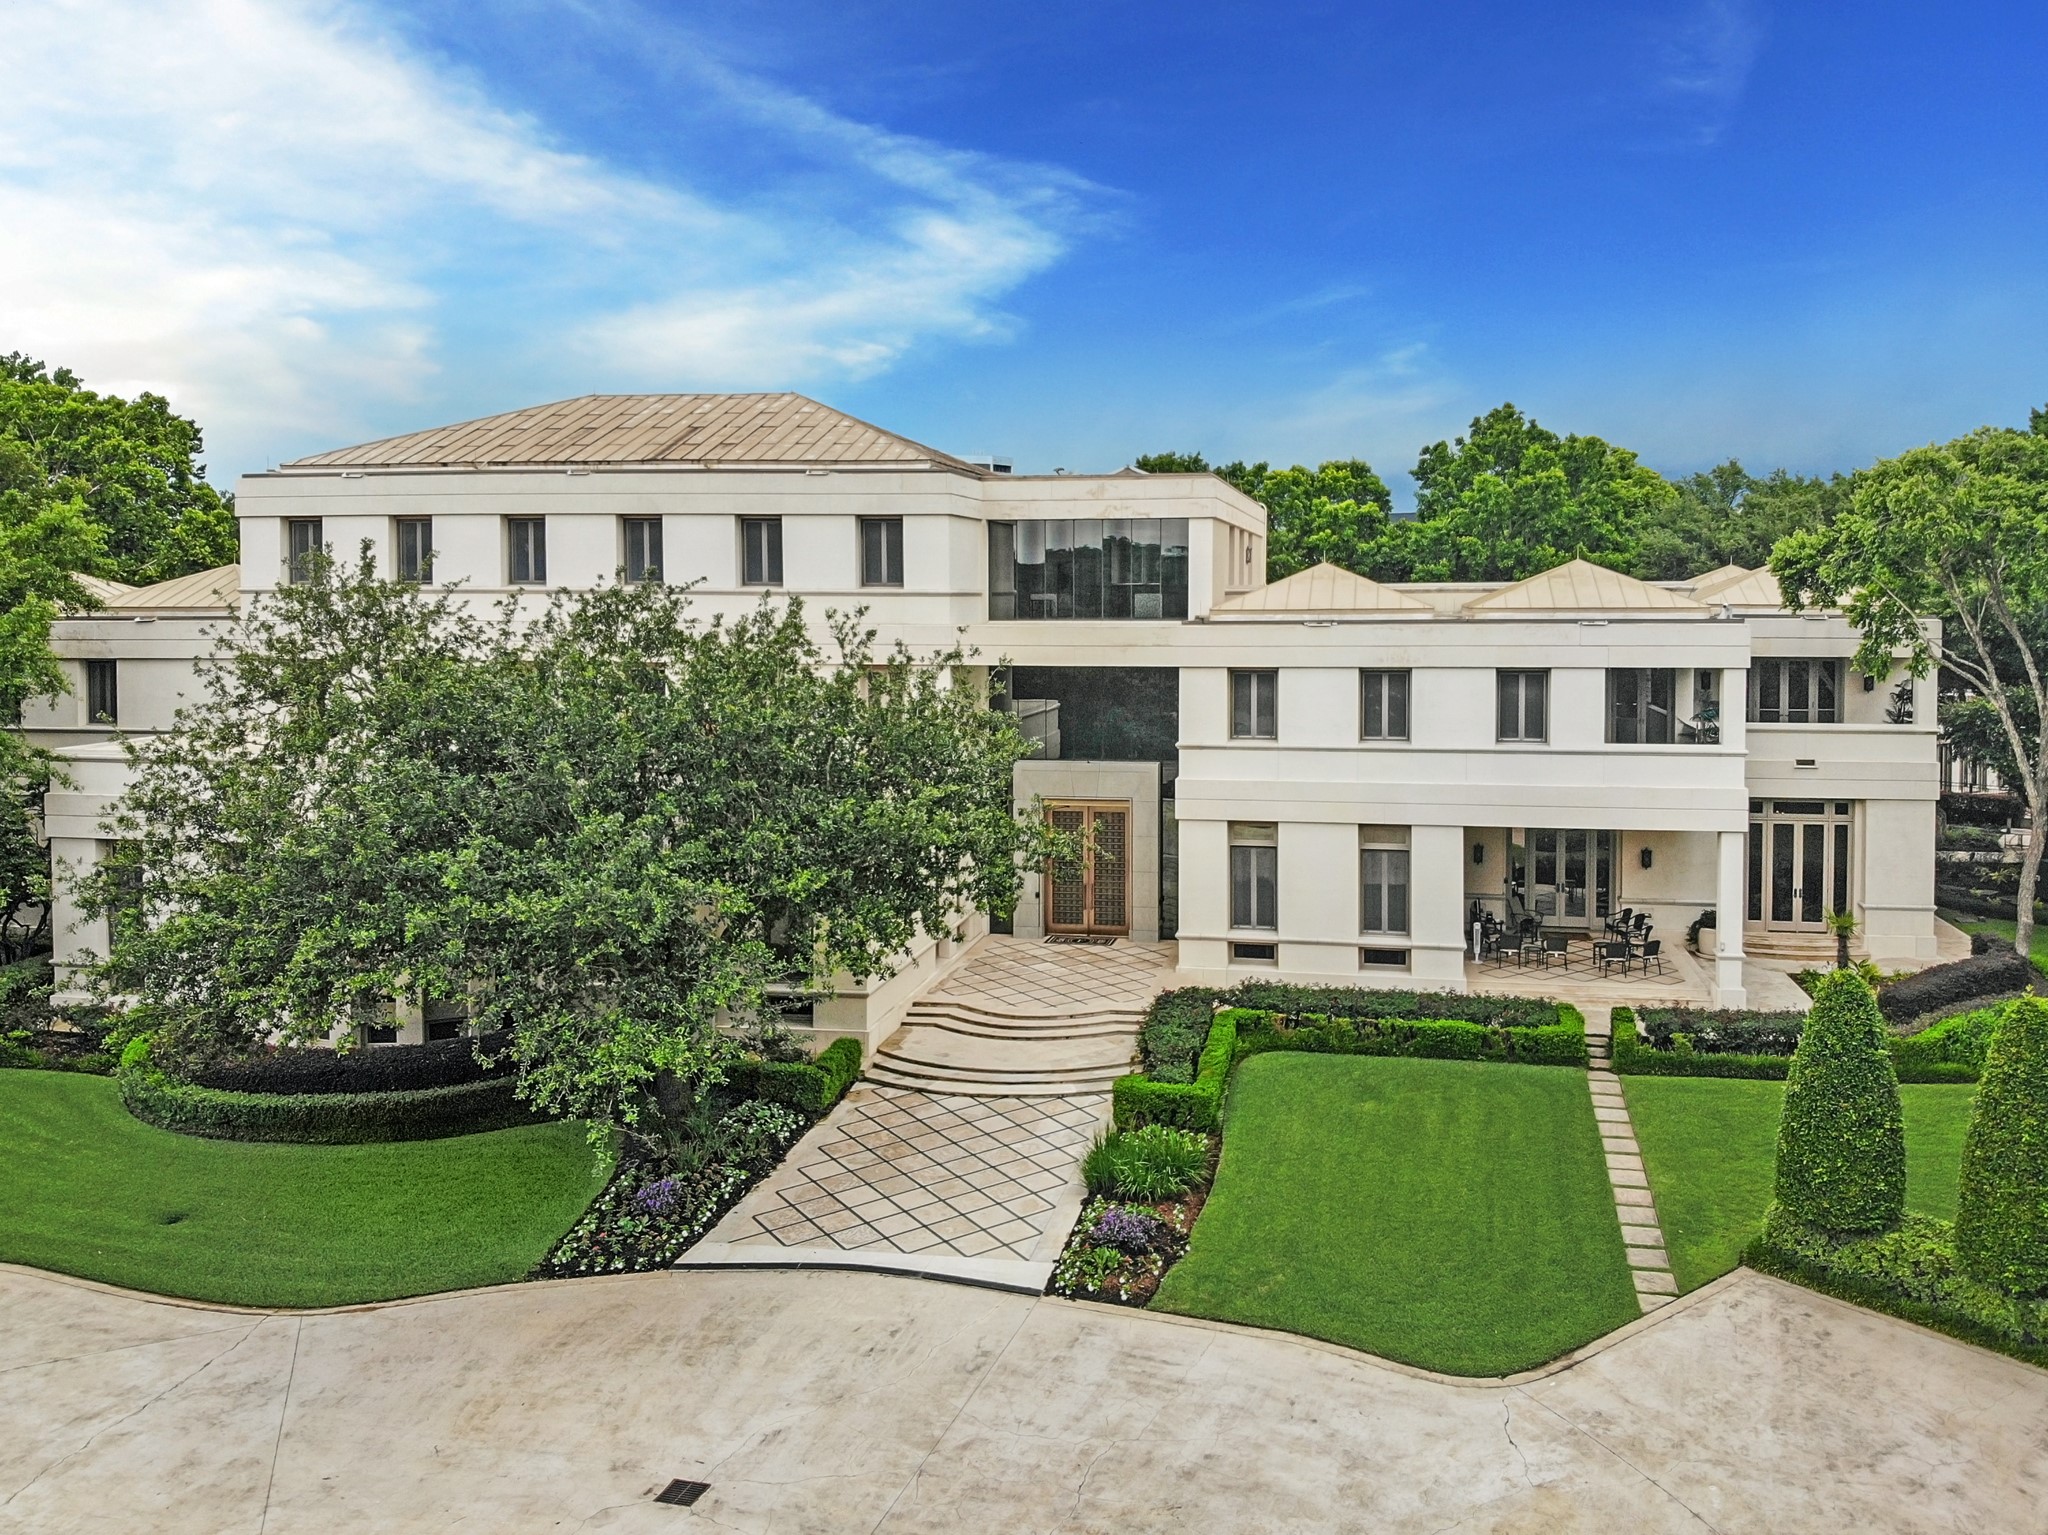 Escape to a world of opulent tranquility with this impeccably designed 22,880 sf 3-story palatial home in Houston’s most prestigious residential community. Framed with meticulous contemporary landscaping, this jaw-dropping estate is perfectly positioned on a 137,650 sf lot on Kirby Drive and boasts an incredible state-of-the-art facade.
